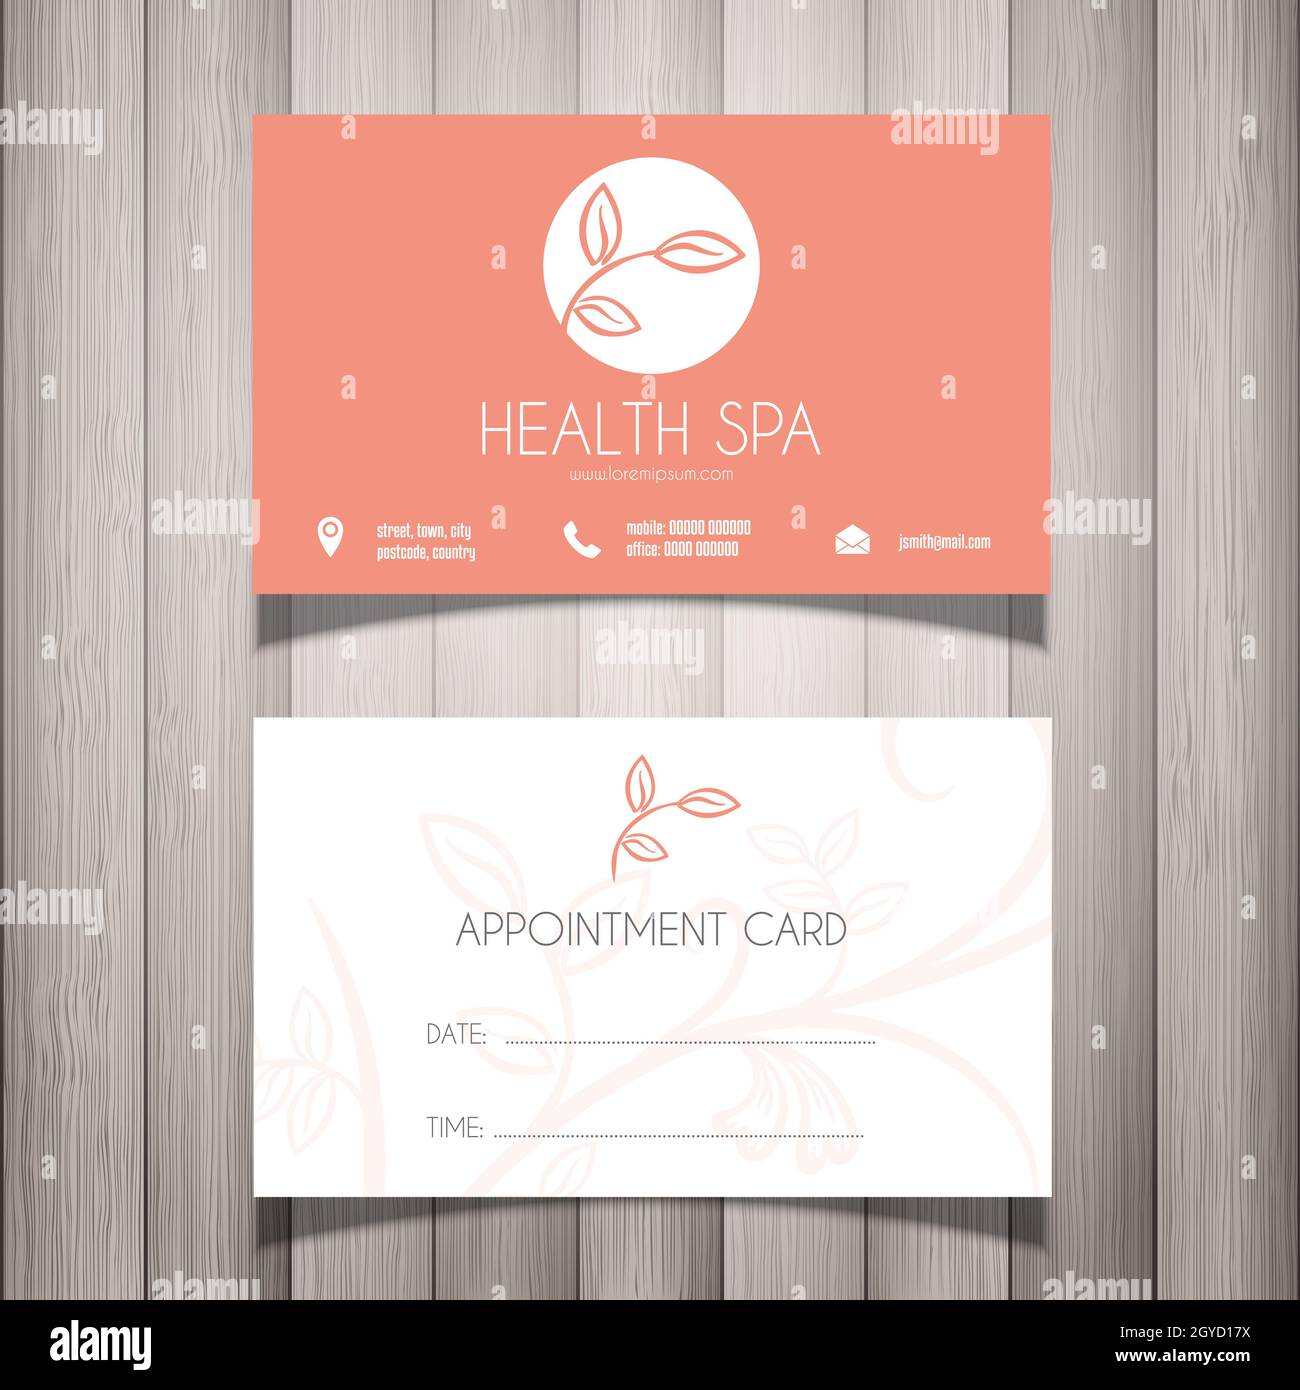 Health Spa or beautician business card / appointment card Stock Photo